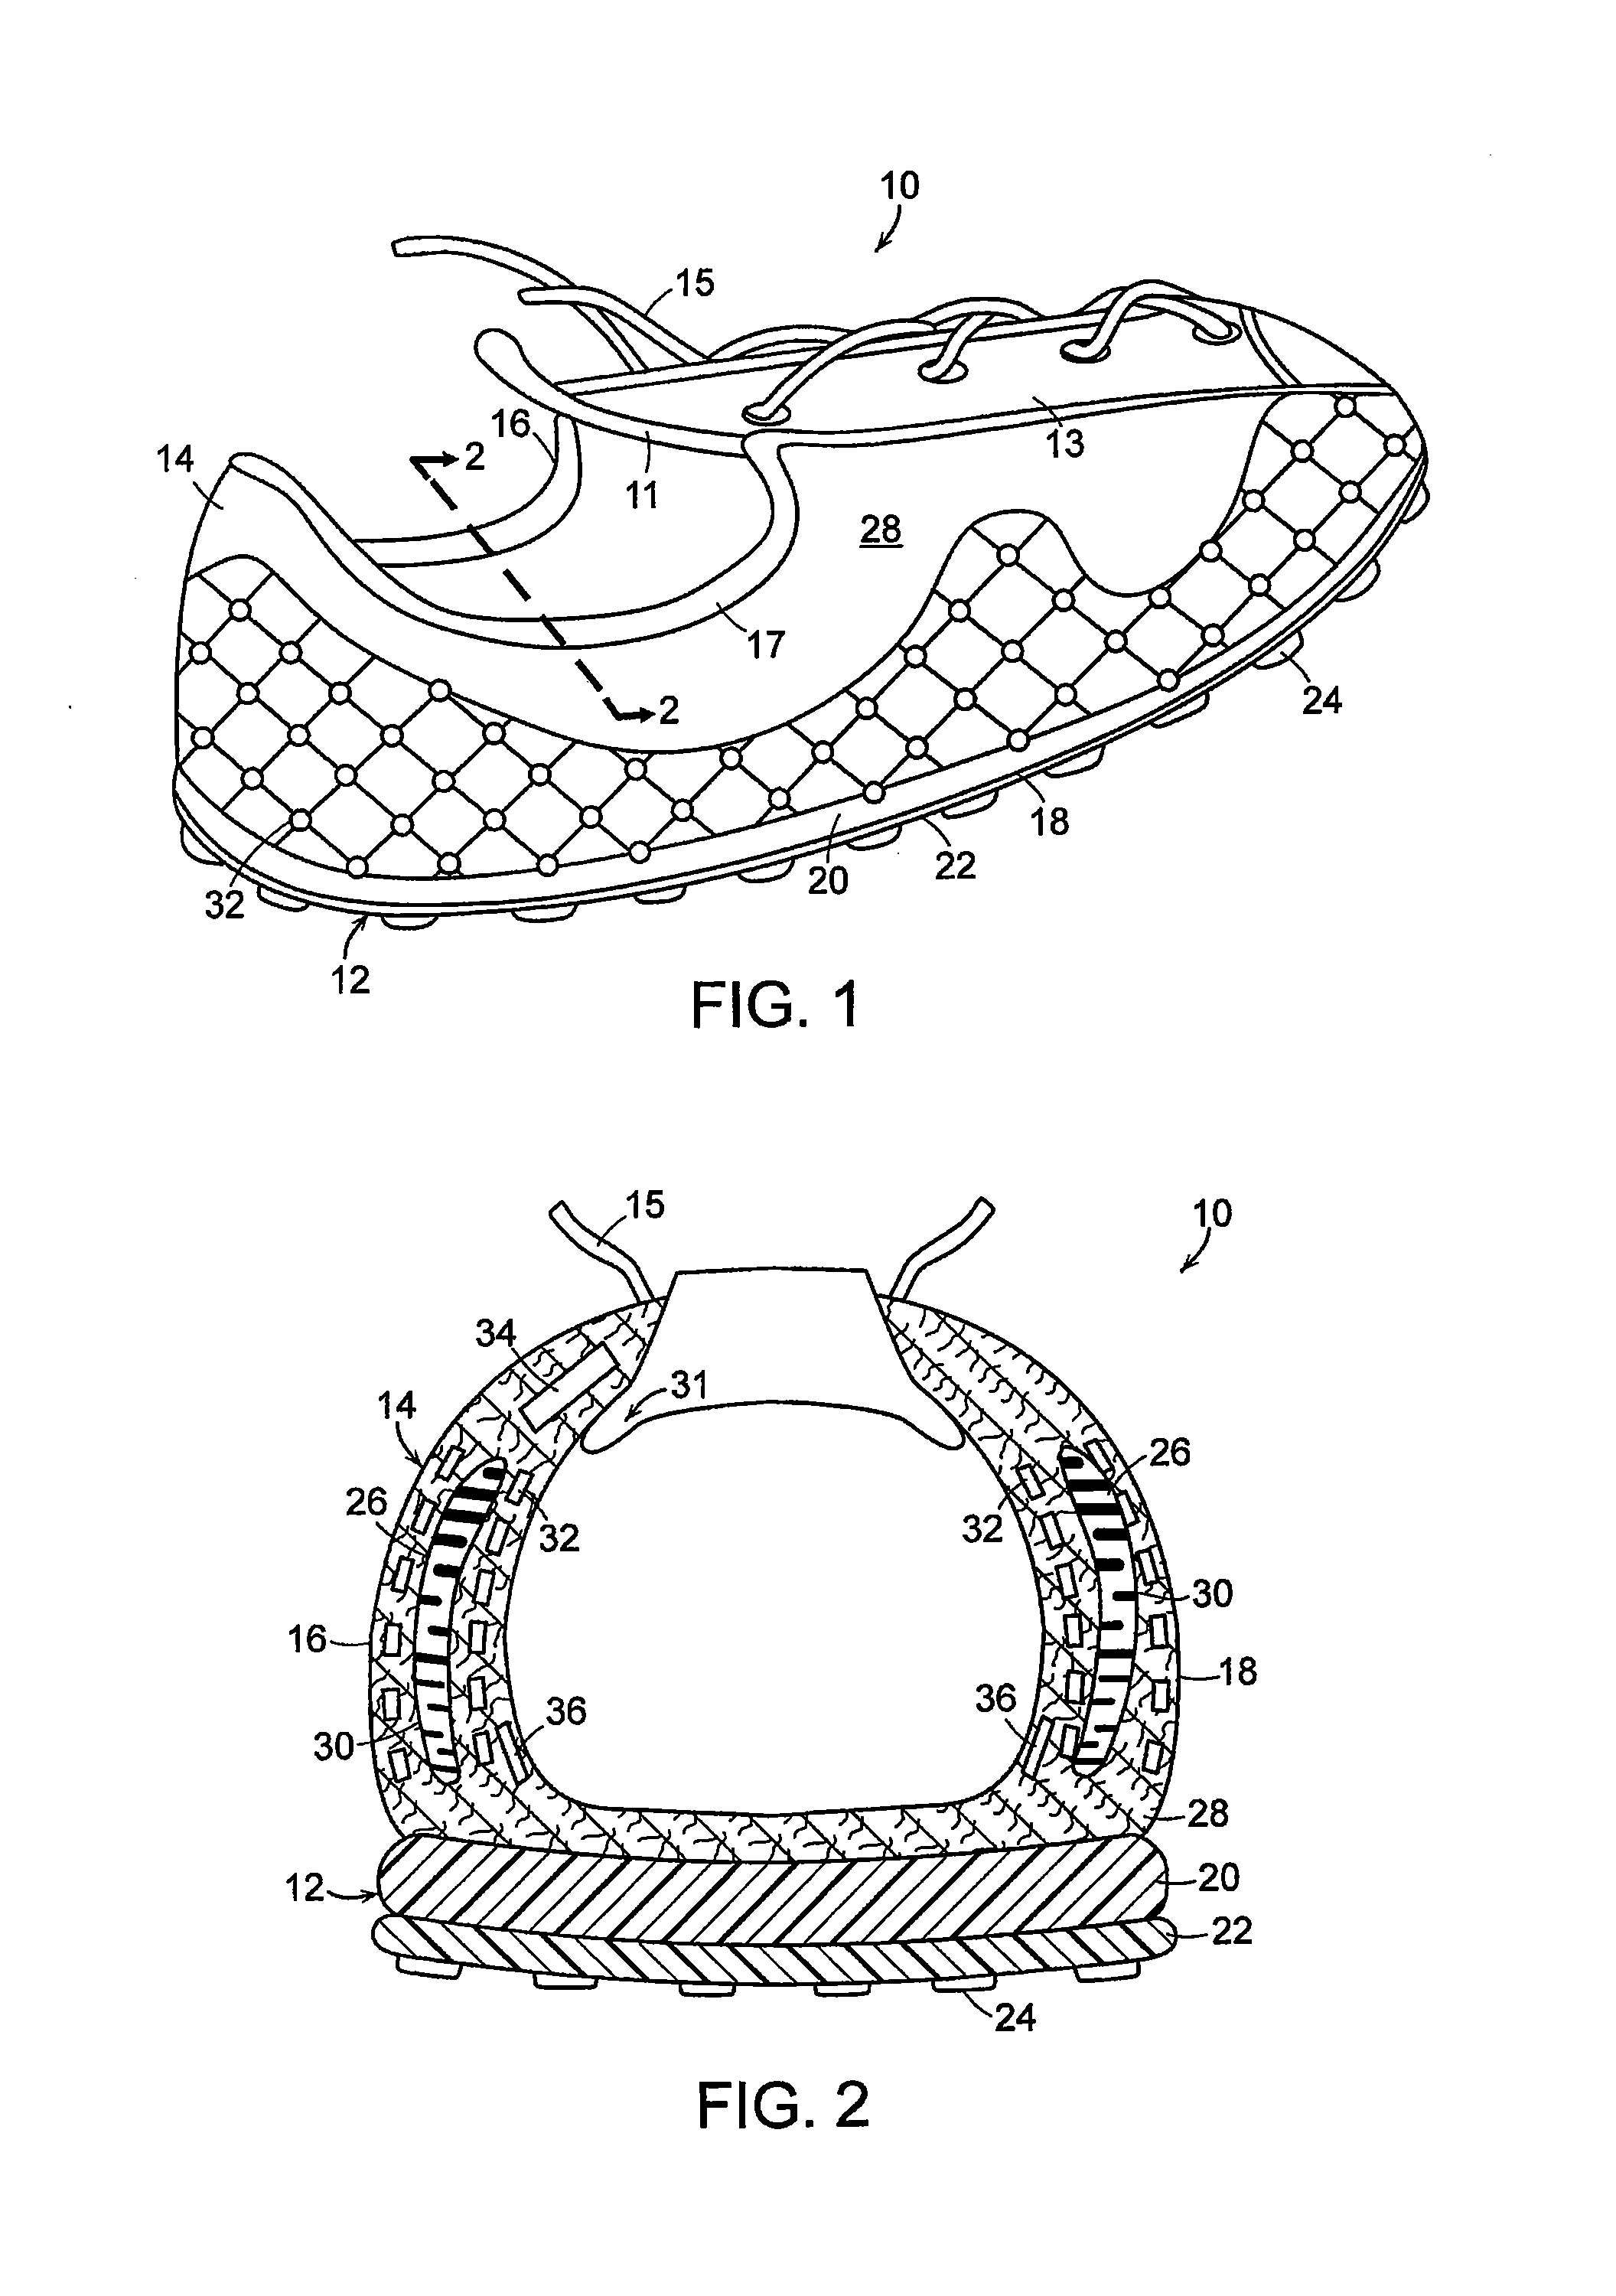 Article of footwear with variable support structure